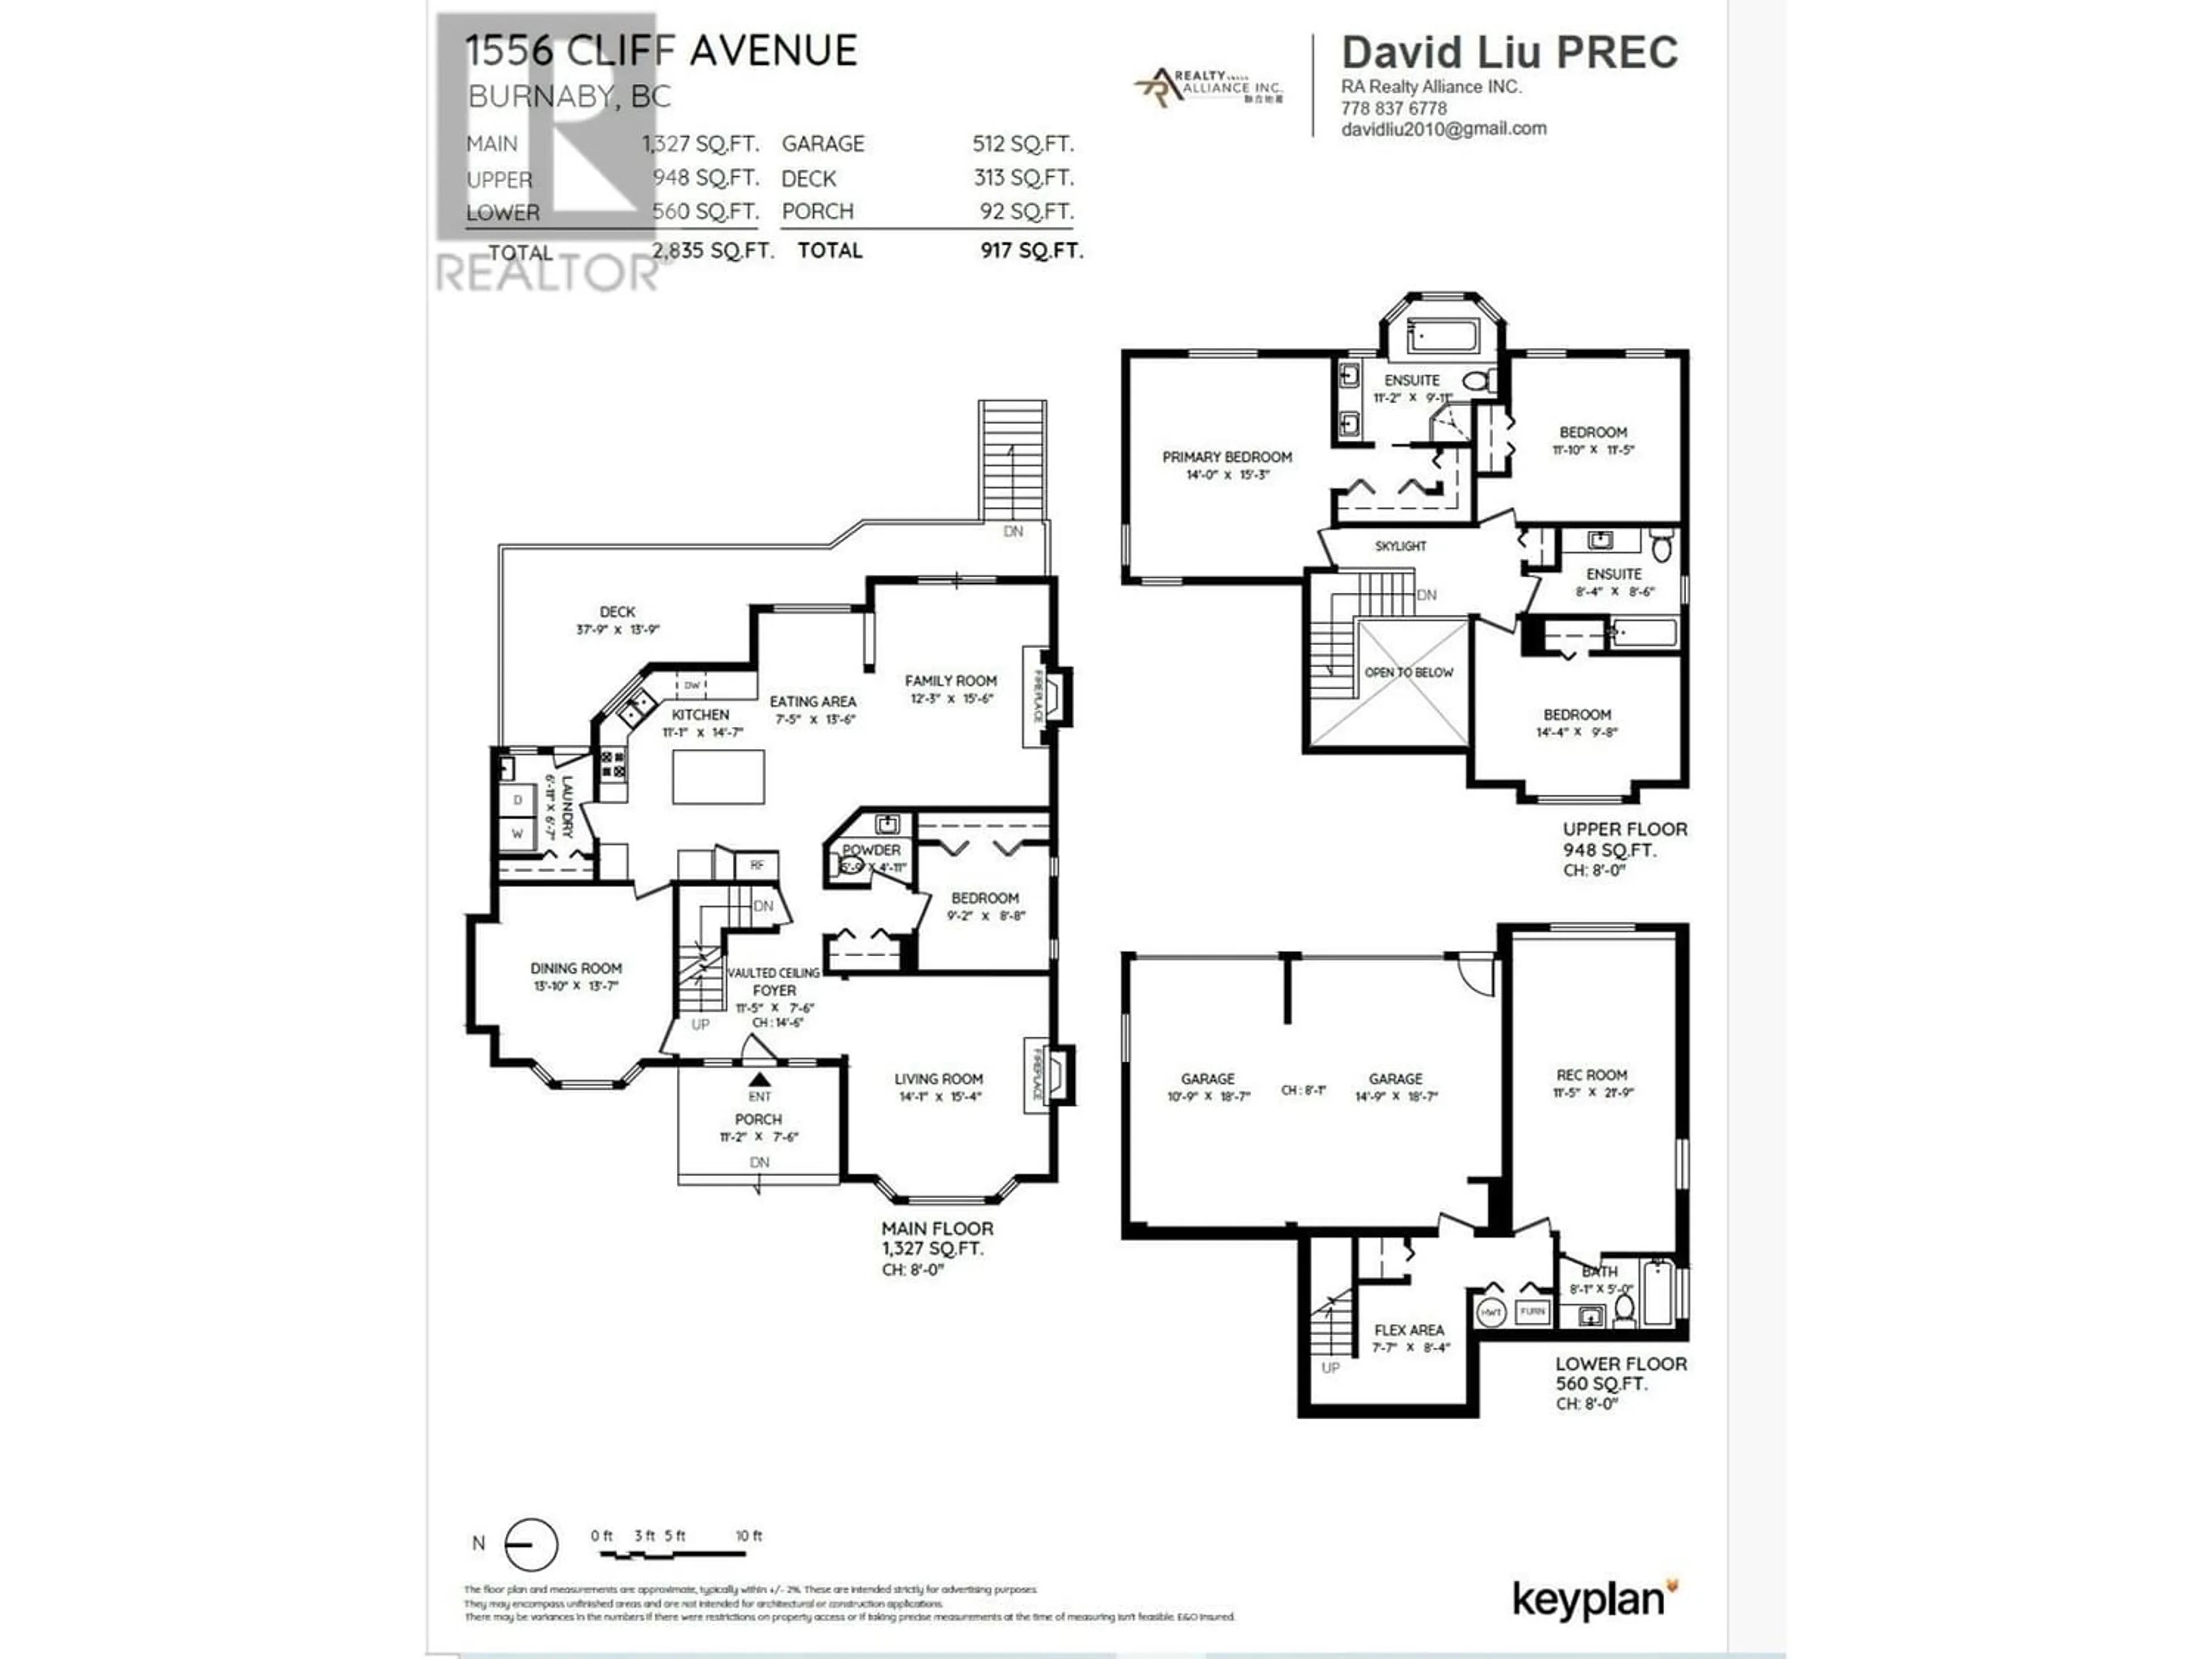 Floor plan for 1556 CLIFF AVENUE, Burnaby British Columbia V5A2K2